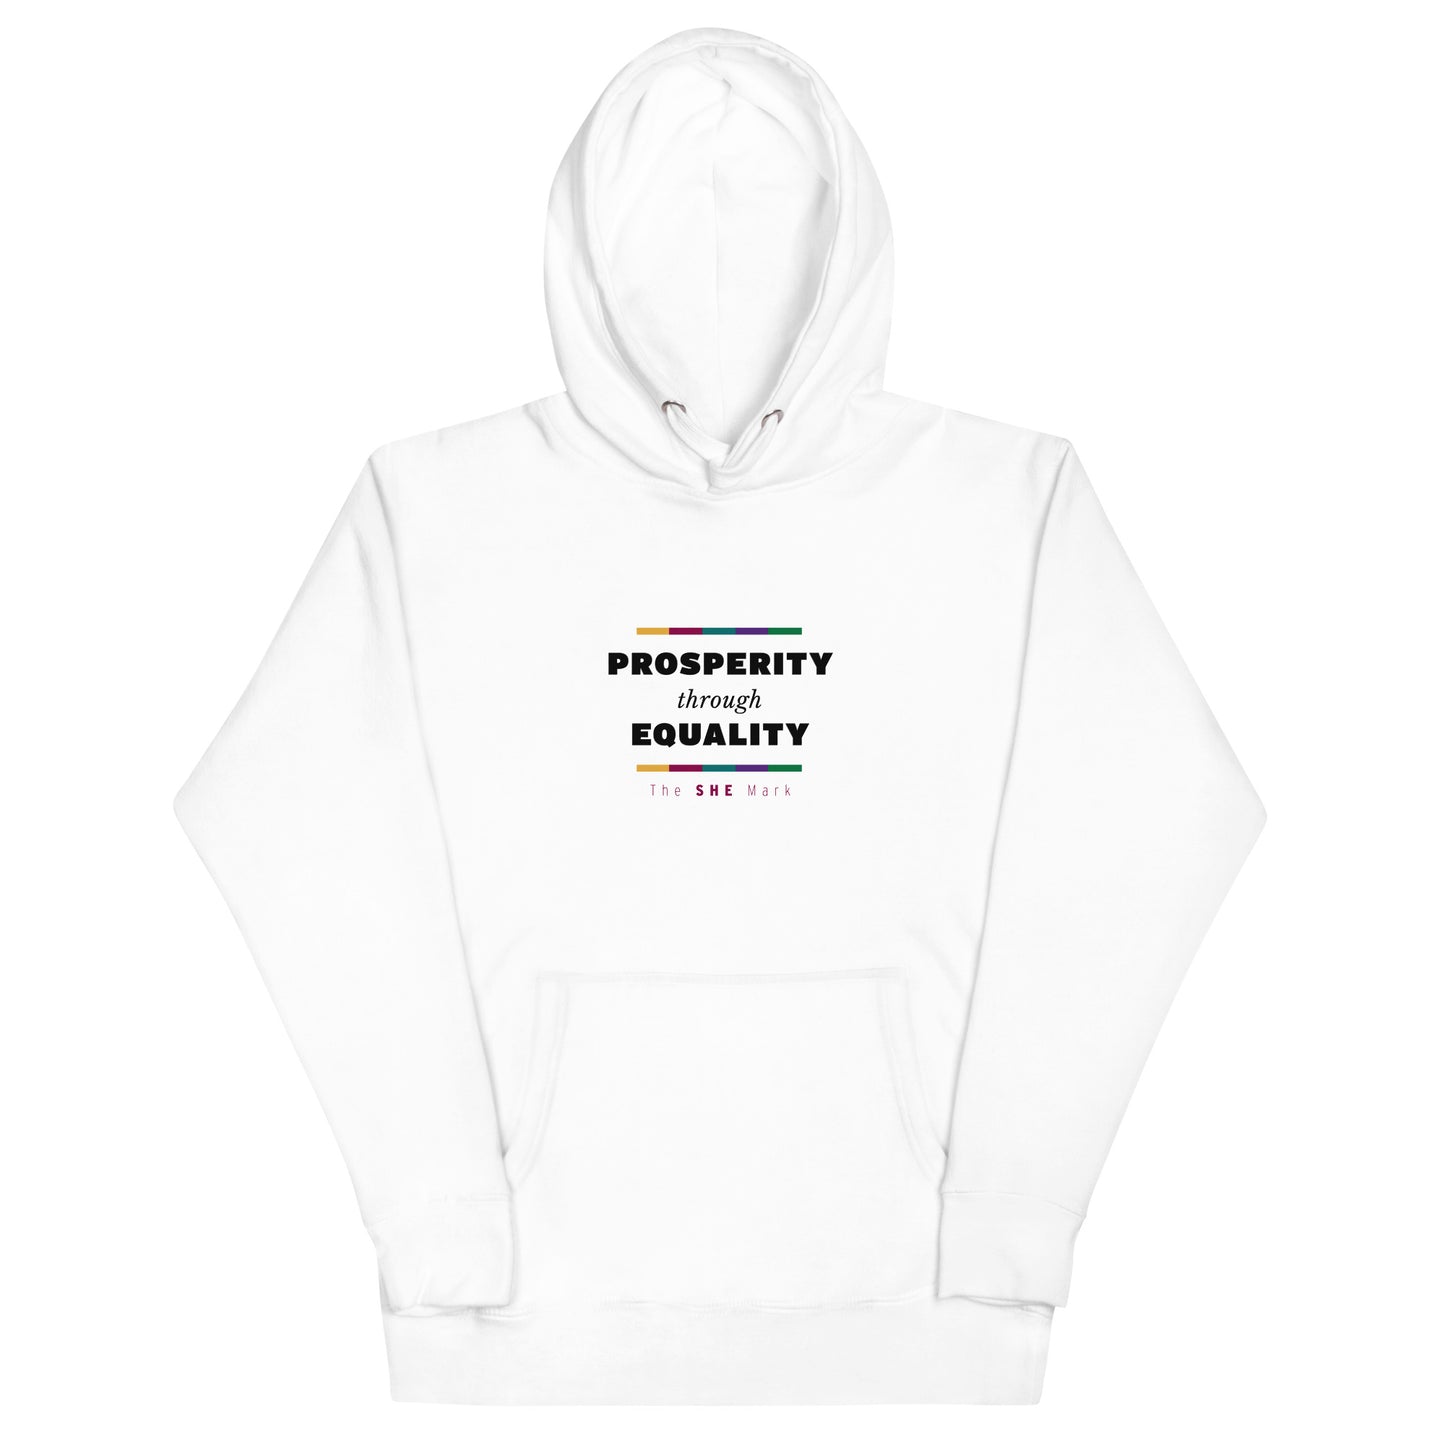 White hoodie sweatshirt with the phrase "prosperity through equality" on the front, centered on the chest. The phrase is in black text, with the words "prosperity" and "equality" in capital letters and bold font. Above and below the phrase is a bar with rectangles of the following colors: gold, ruby, teal, purple, and green. In small ruby text below the design, it reads "The SHE Mark." On the back of the hoodie at the neck is "SHE" in capital letters and in gold, with a ruby and teal shadow.